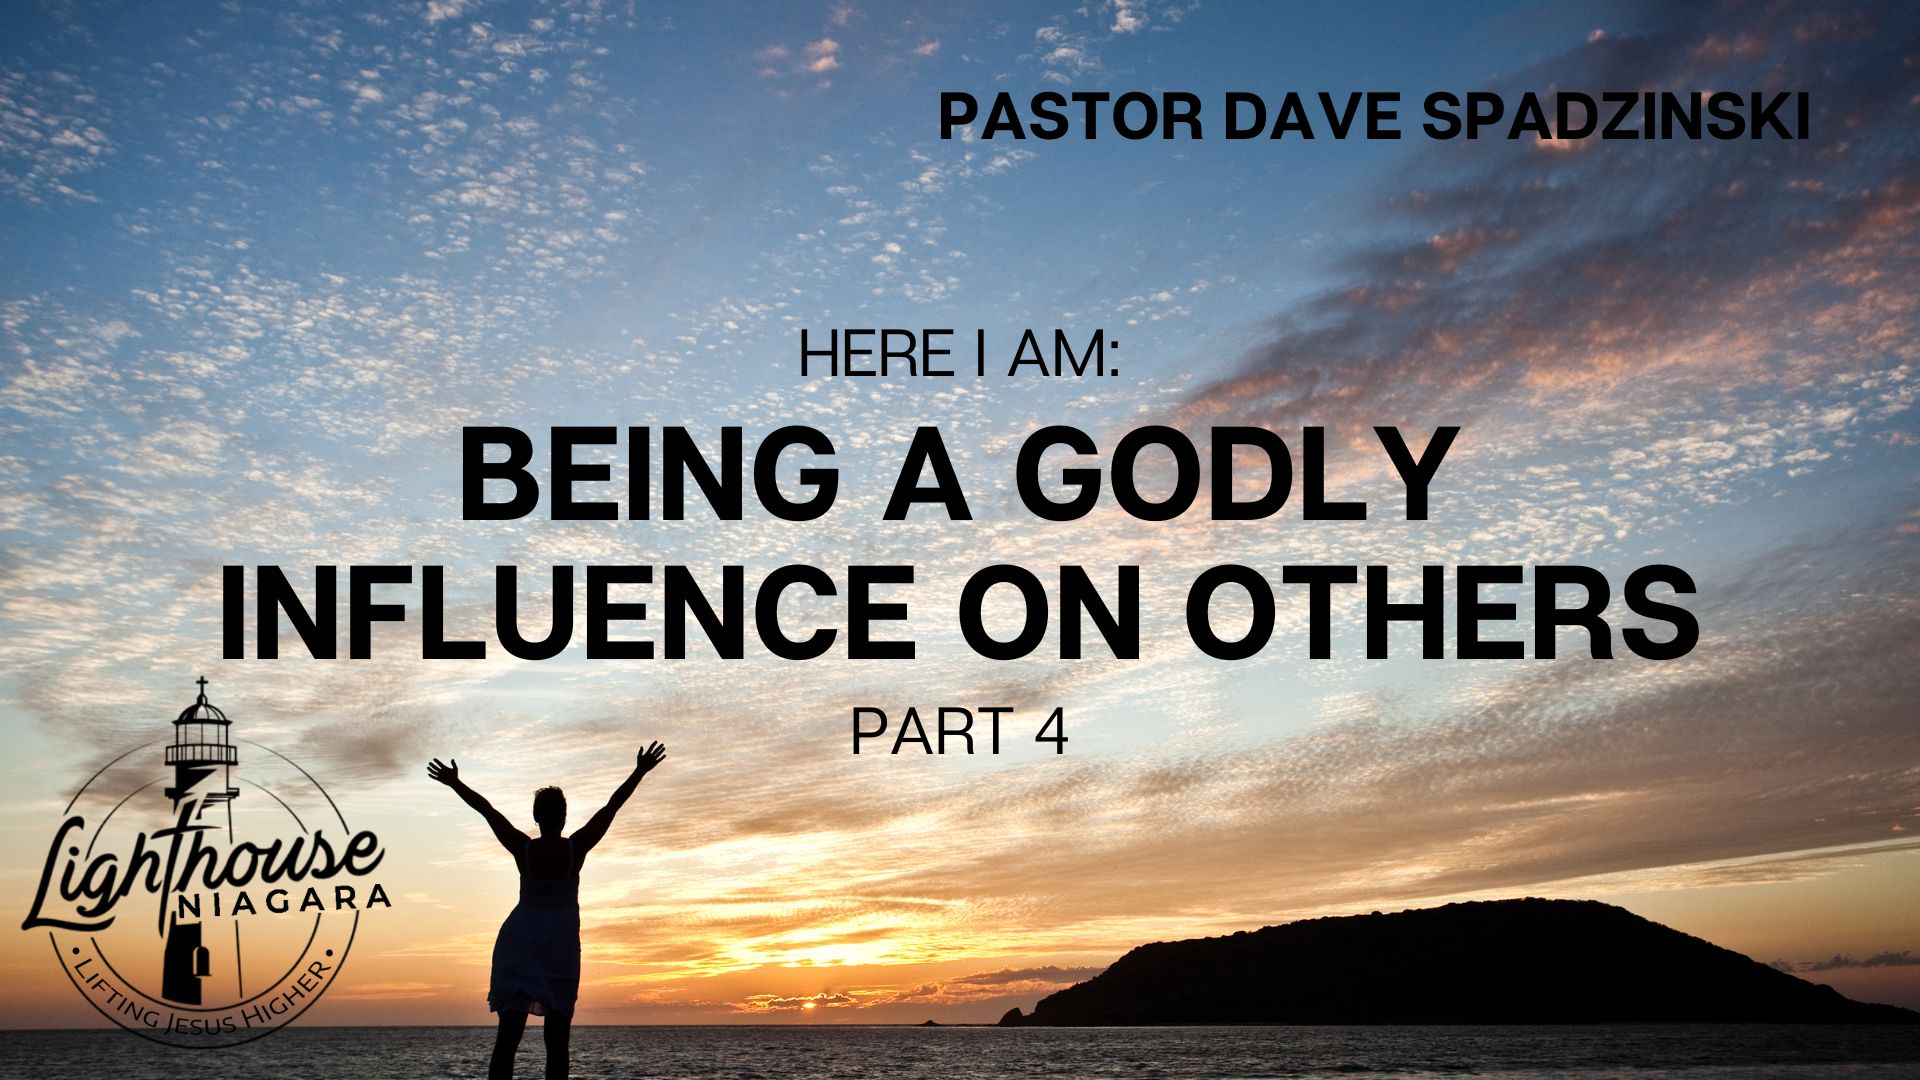 Here I Am: Being A Godly Influence On Others - Pastor Dave Spadzinski